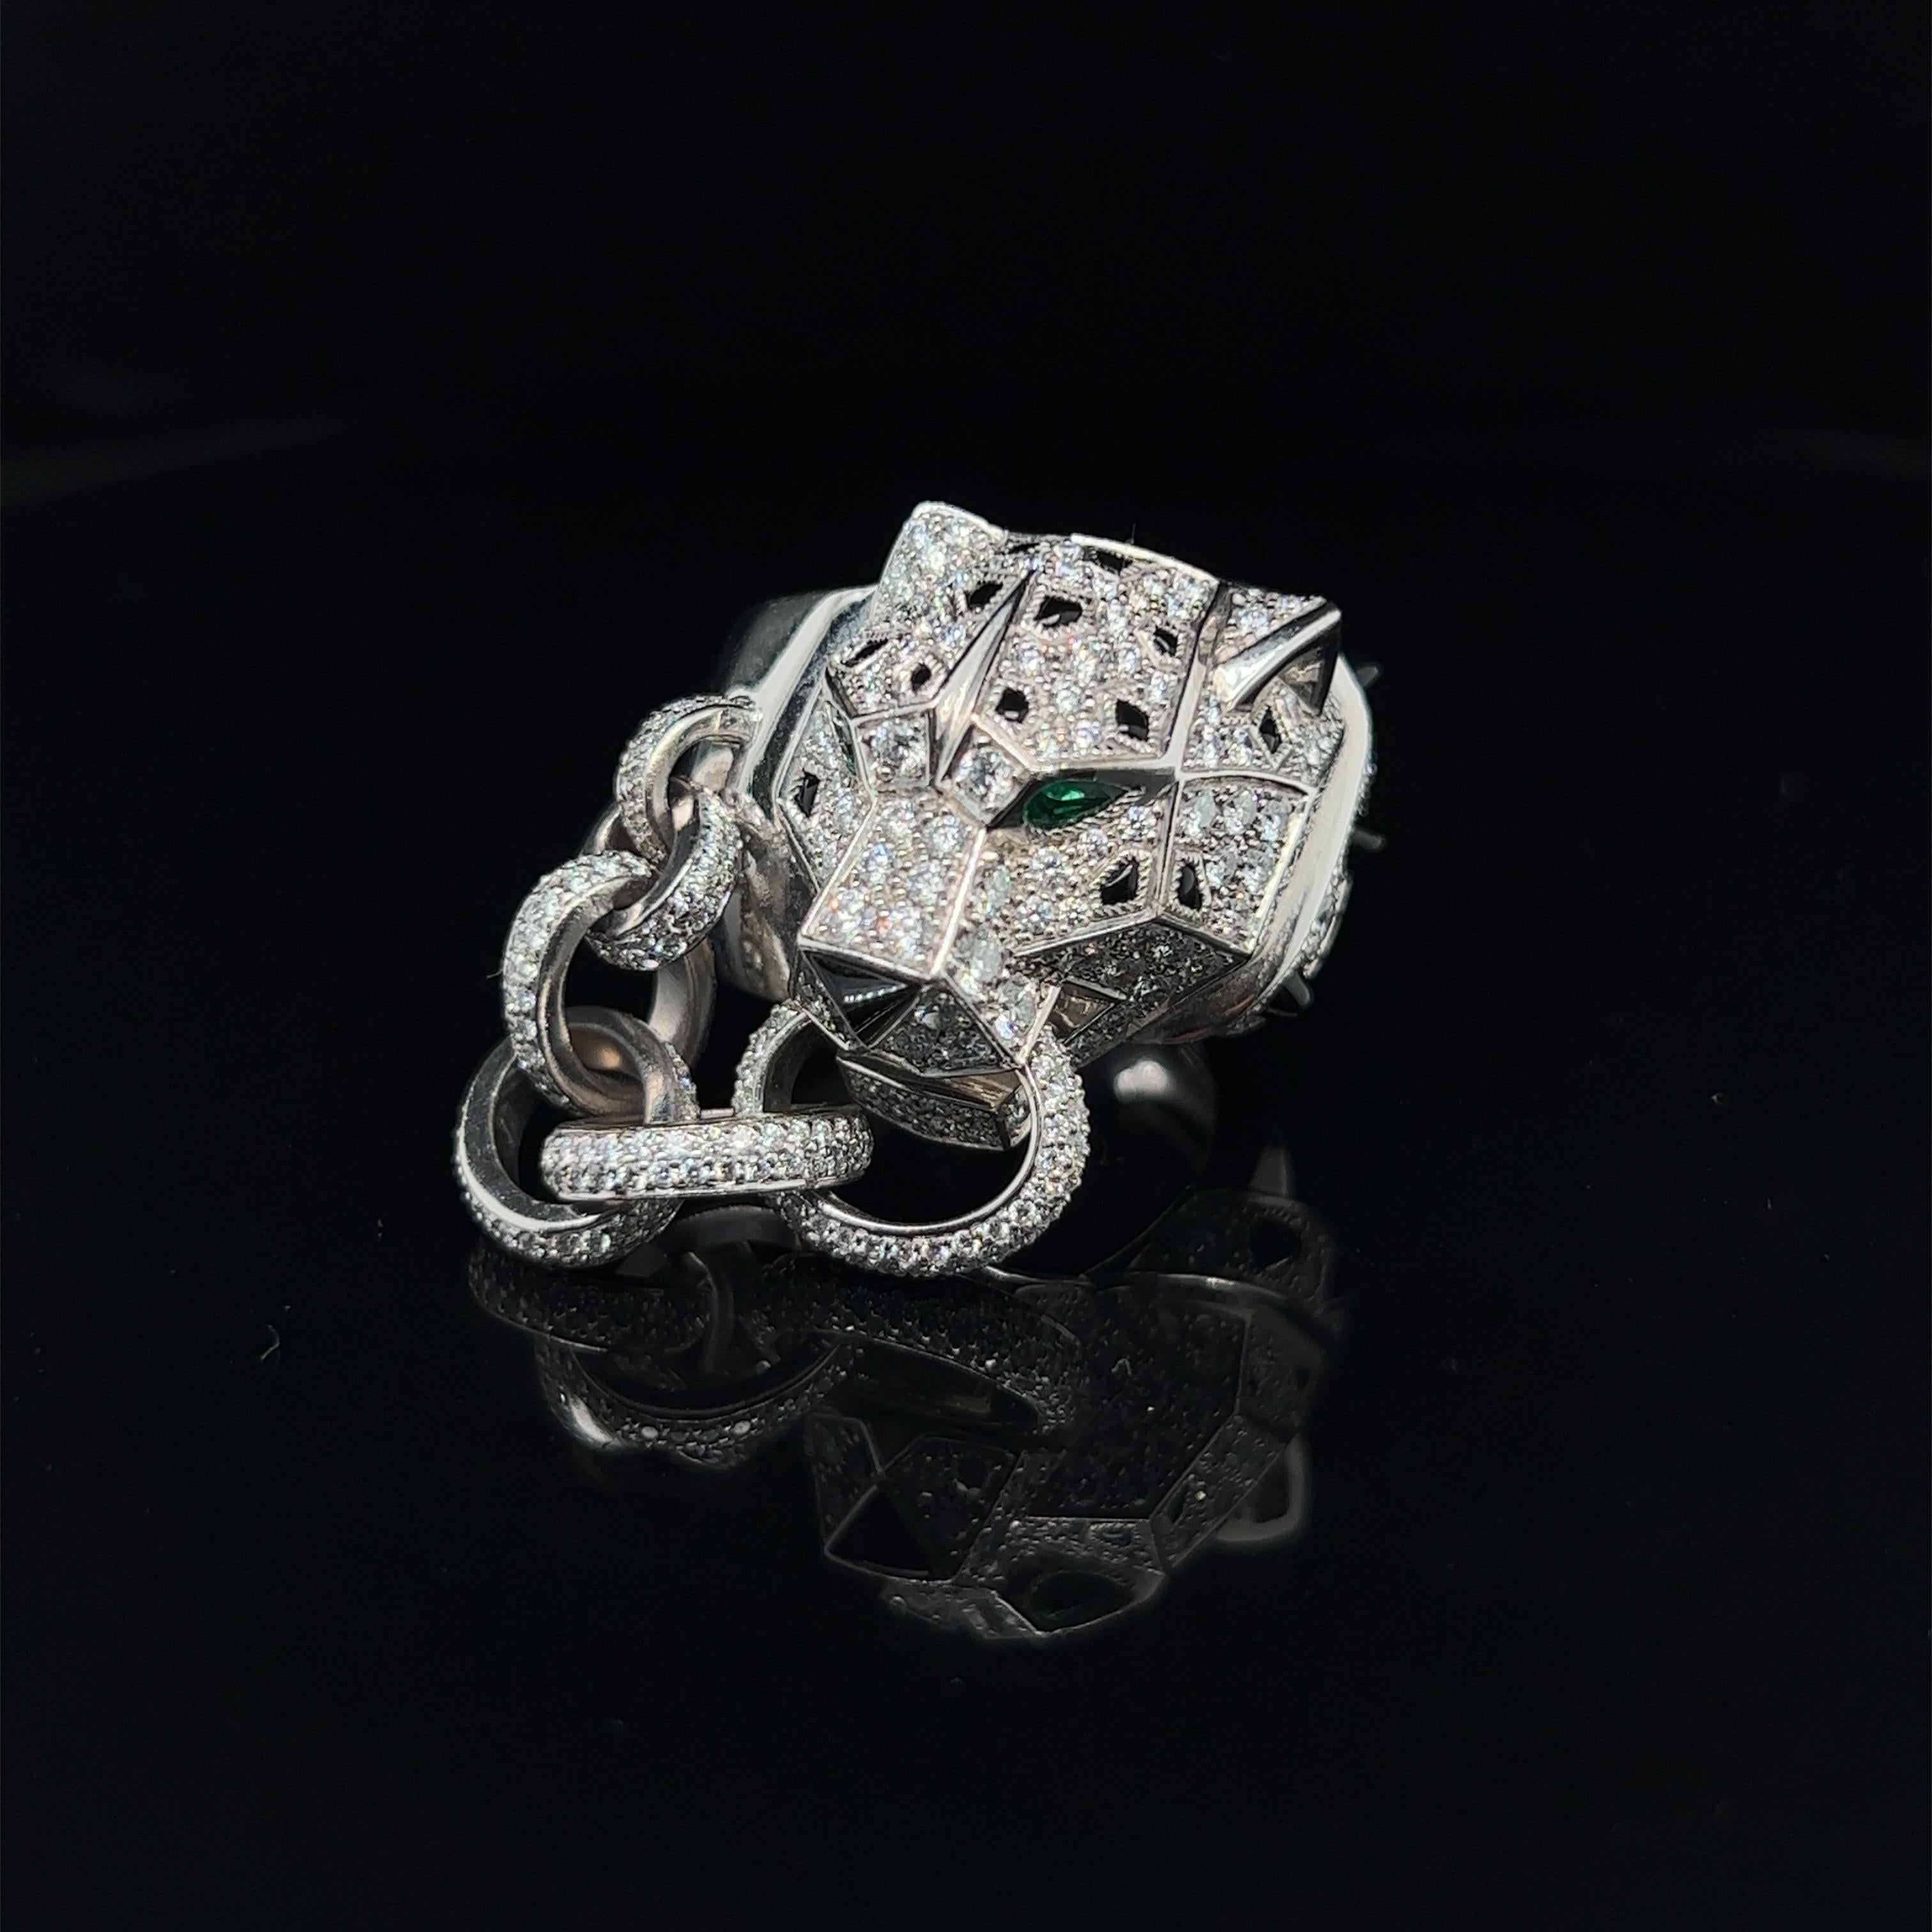 Magnificent emerald, onyx and diamond 18 karat white gold Panthère de Cartier ring, 2018.

This spectacular ring depicts the Maison's most iconic creature, the panther. It is crafted in 18 karat white gold, the head pavé-set with numerous